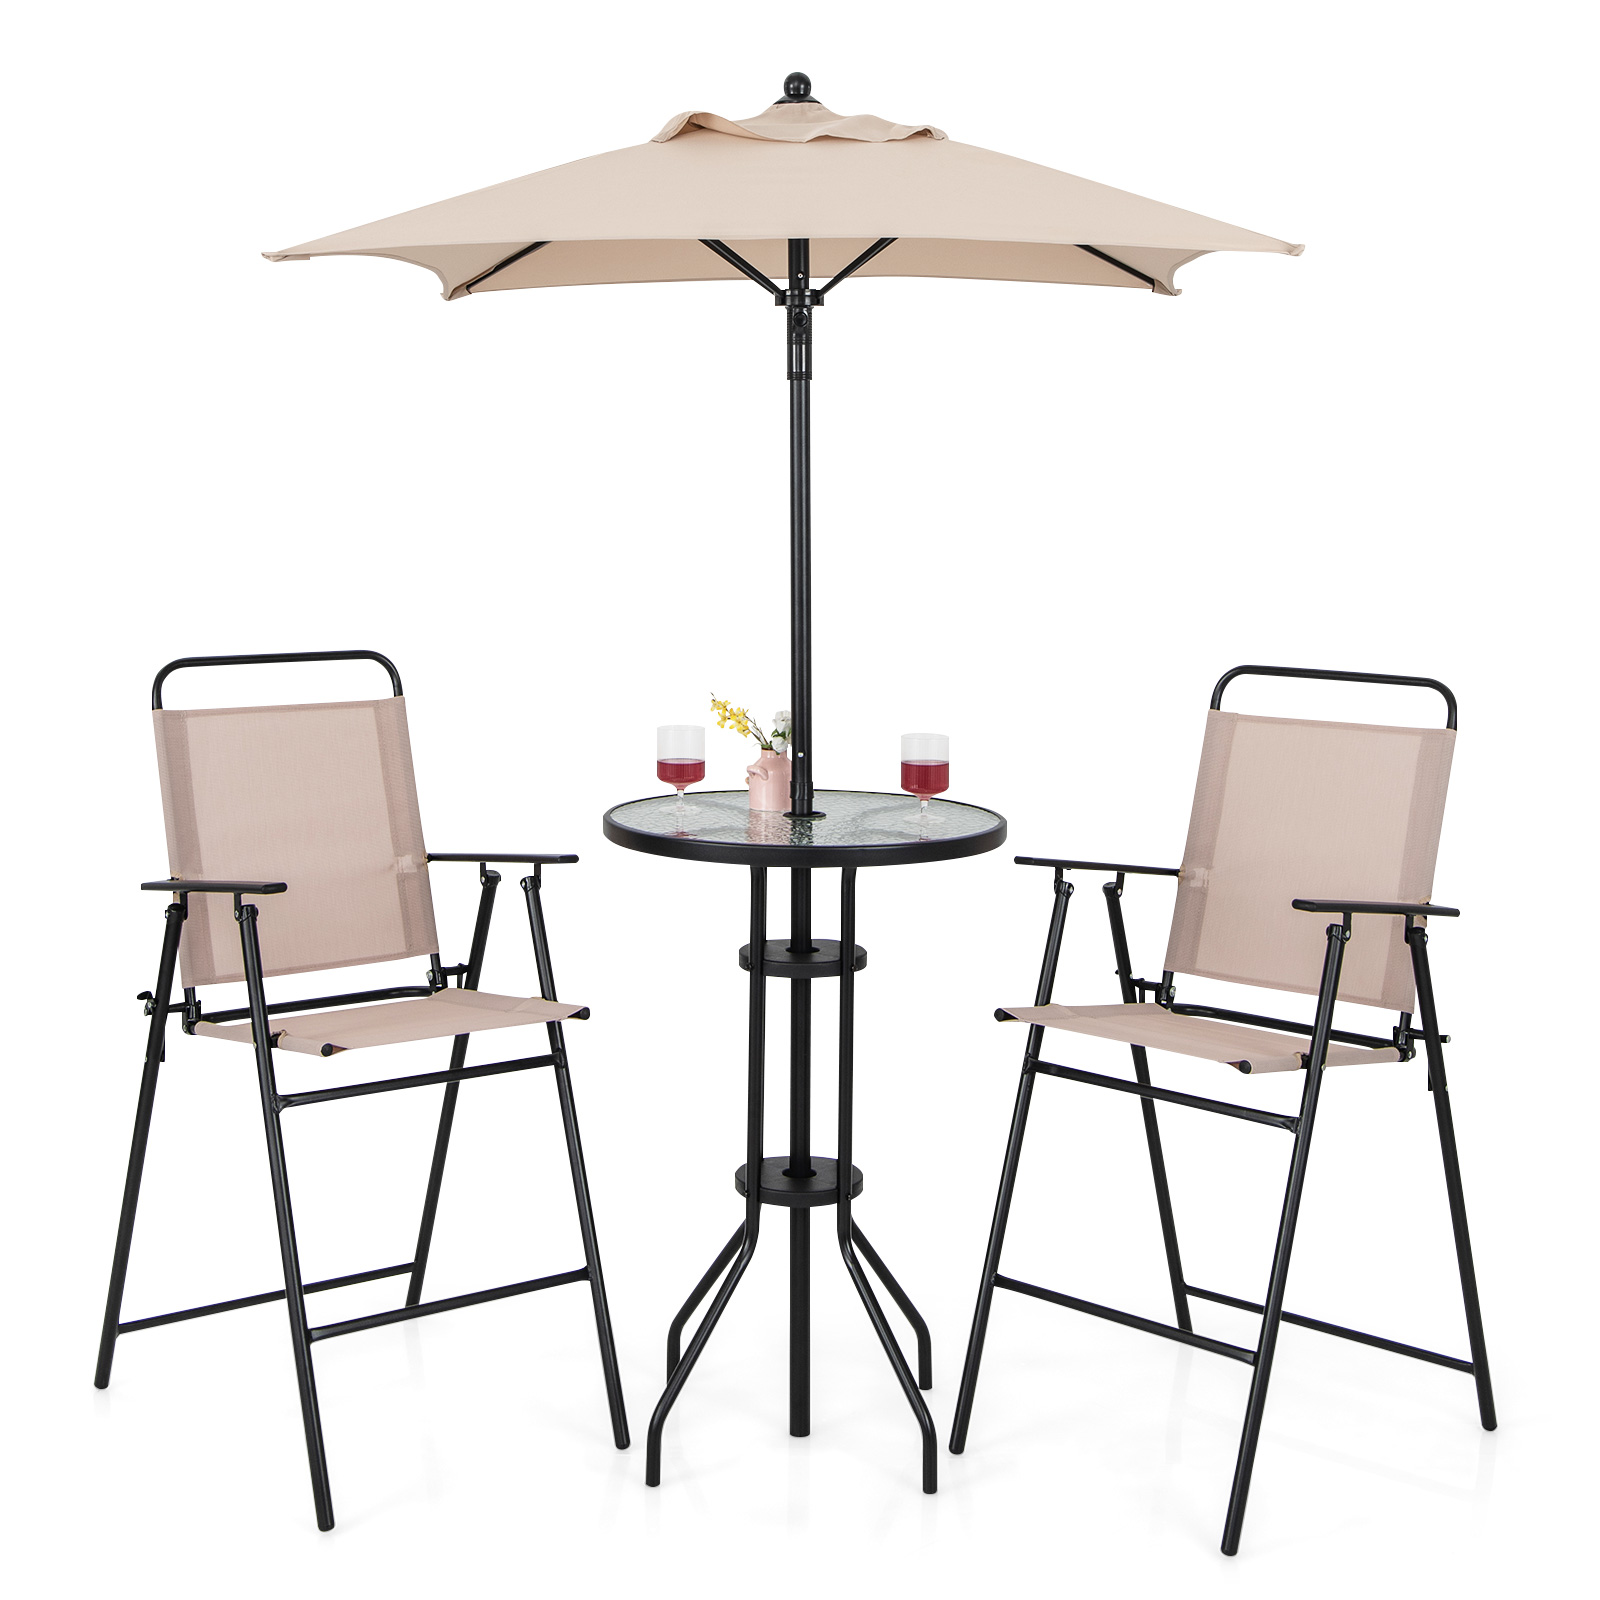 4 Pieces Outdoor Bar Set with 2 Folding Counter Height Chairs and Umbrella-Beige